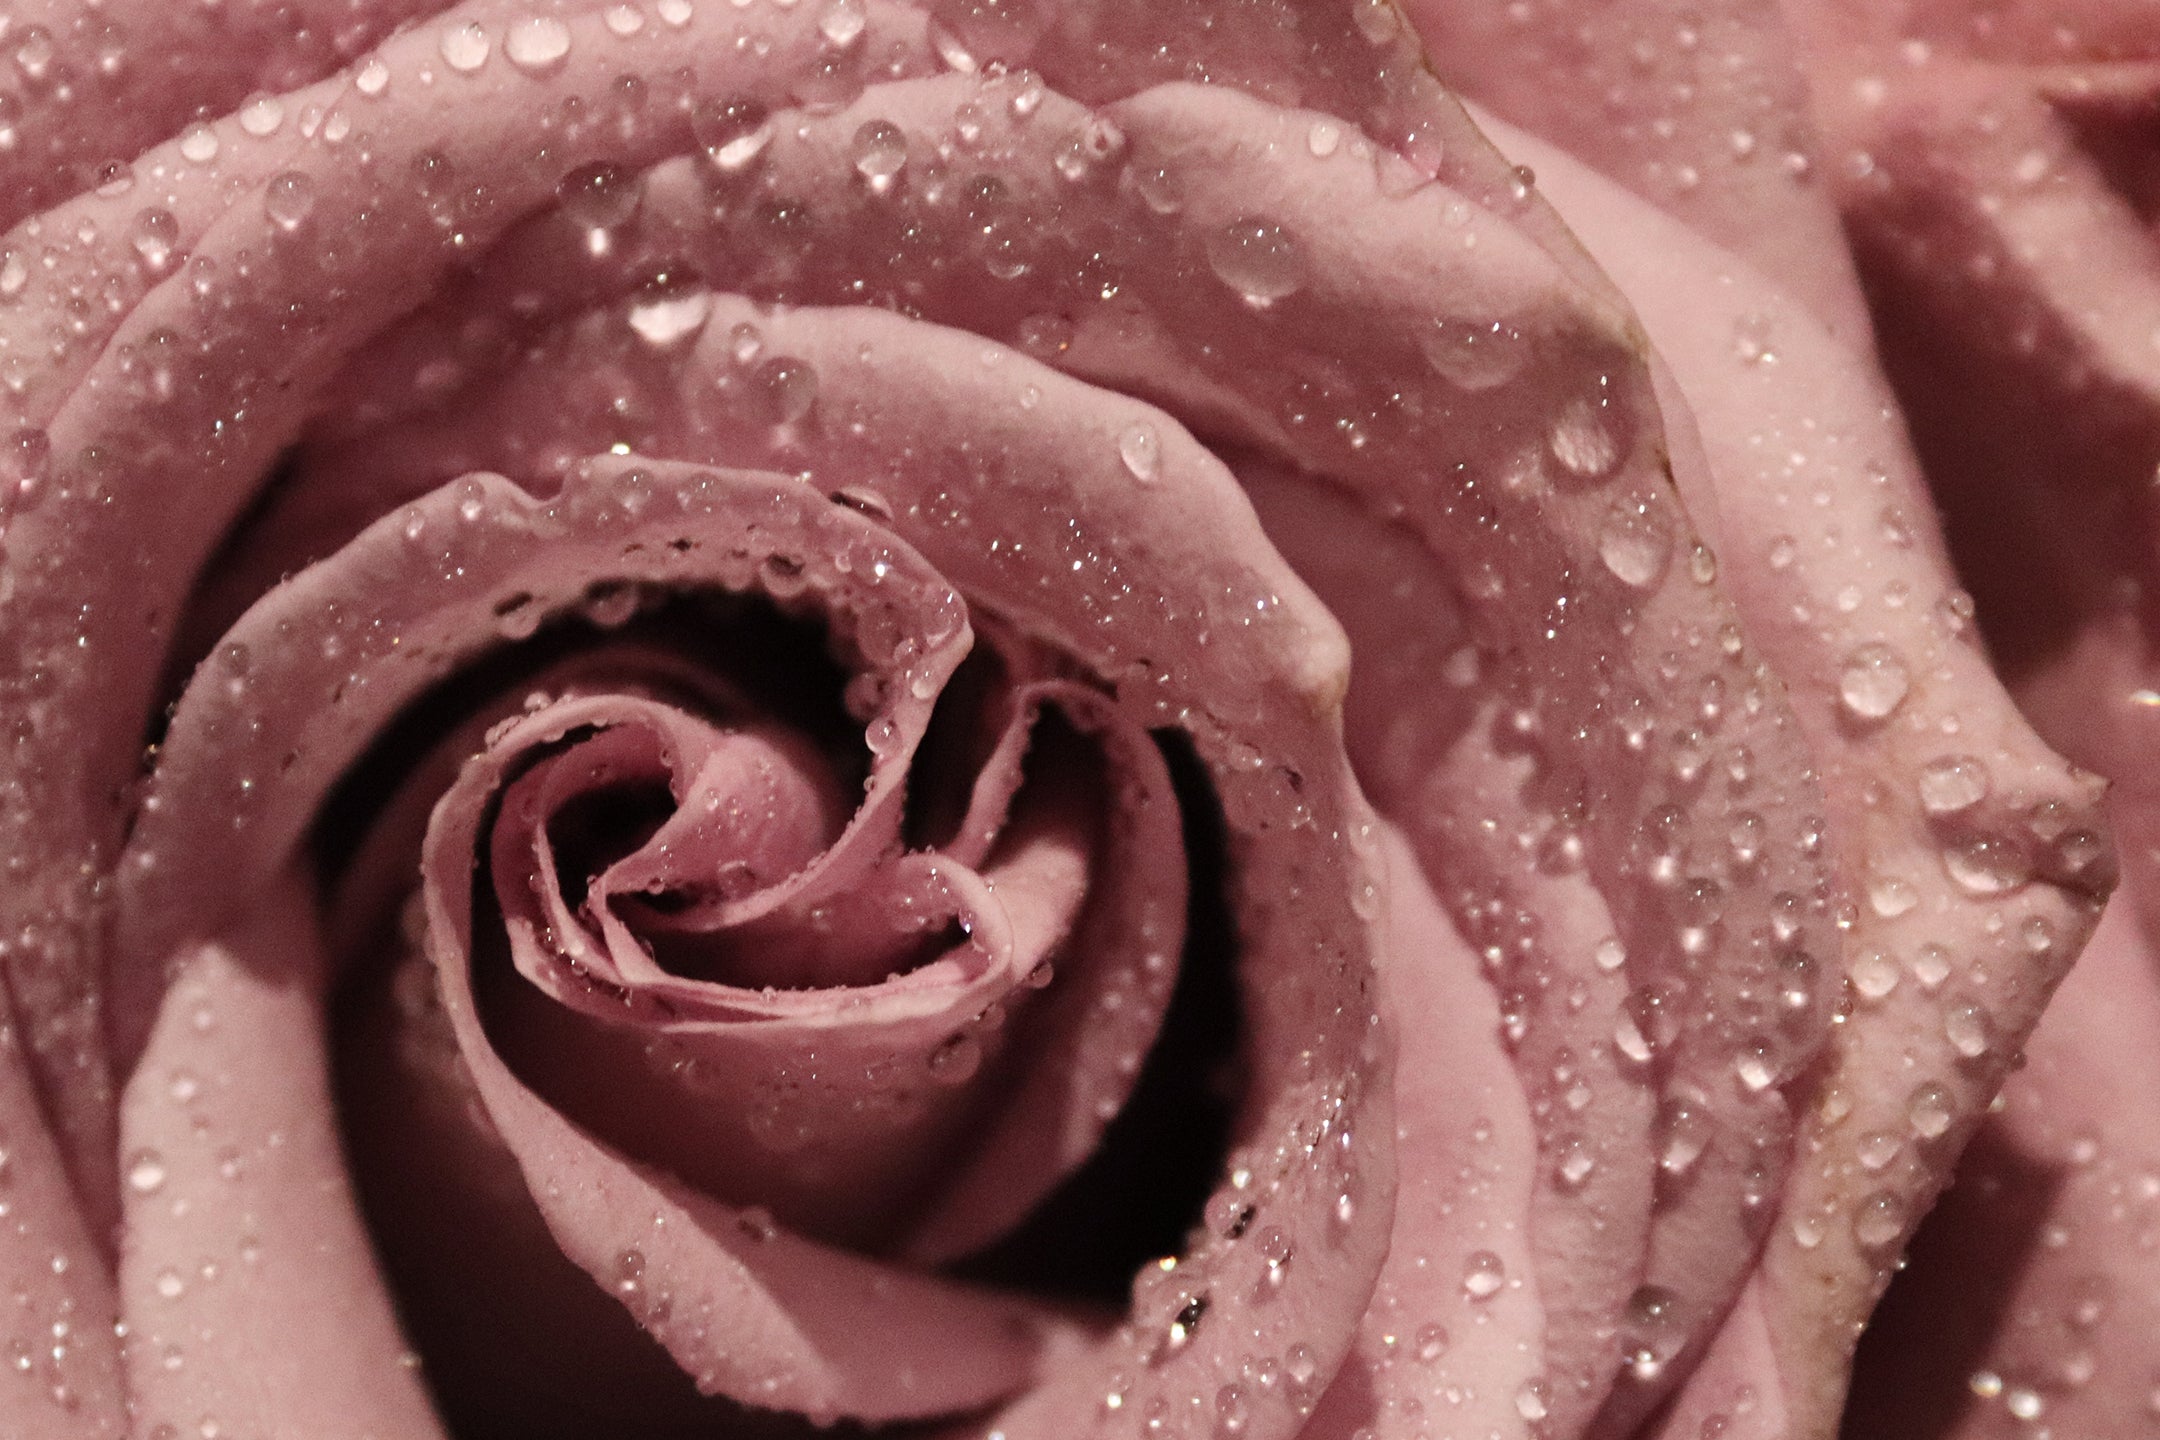 Discover The Astonishing Health And Beauty Benefits Of Rose